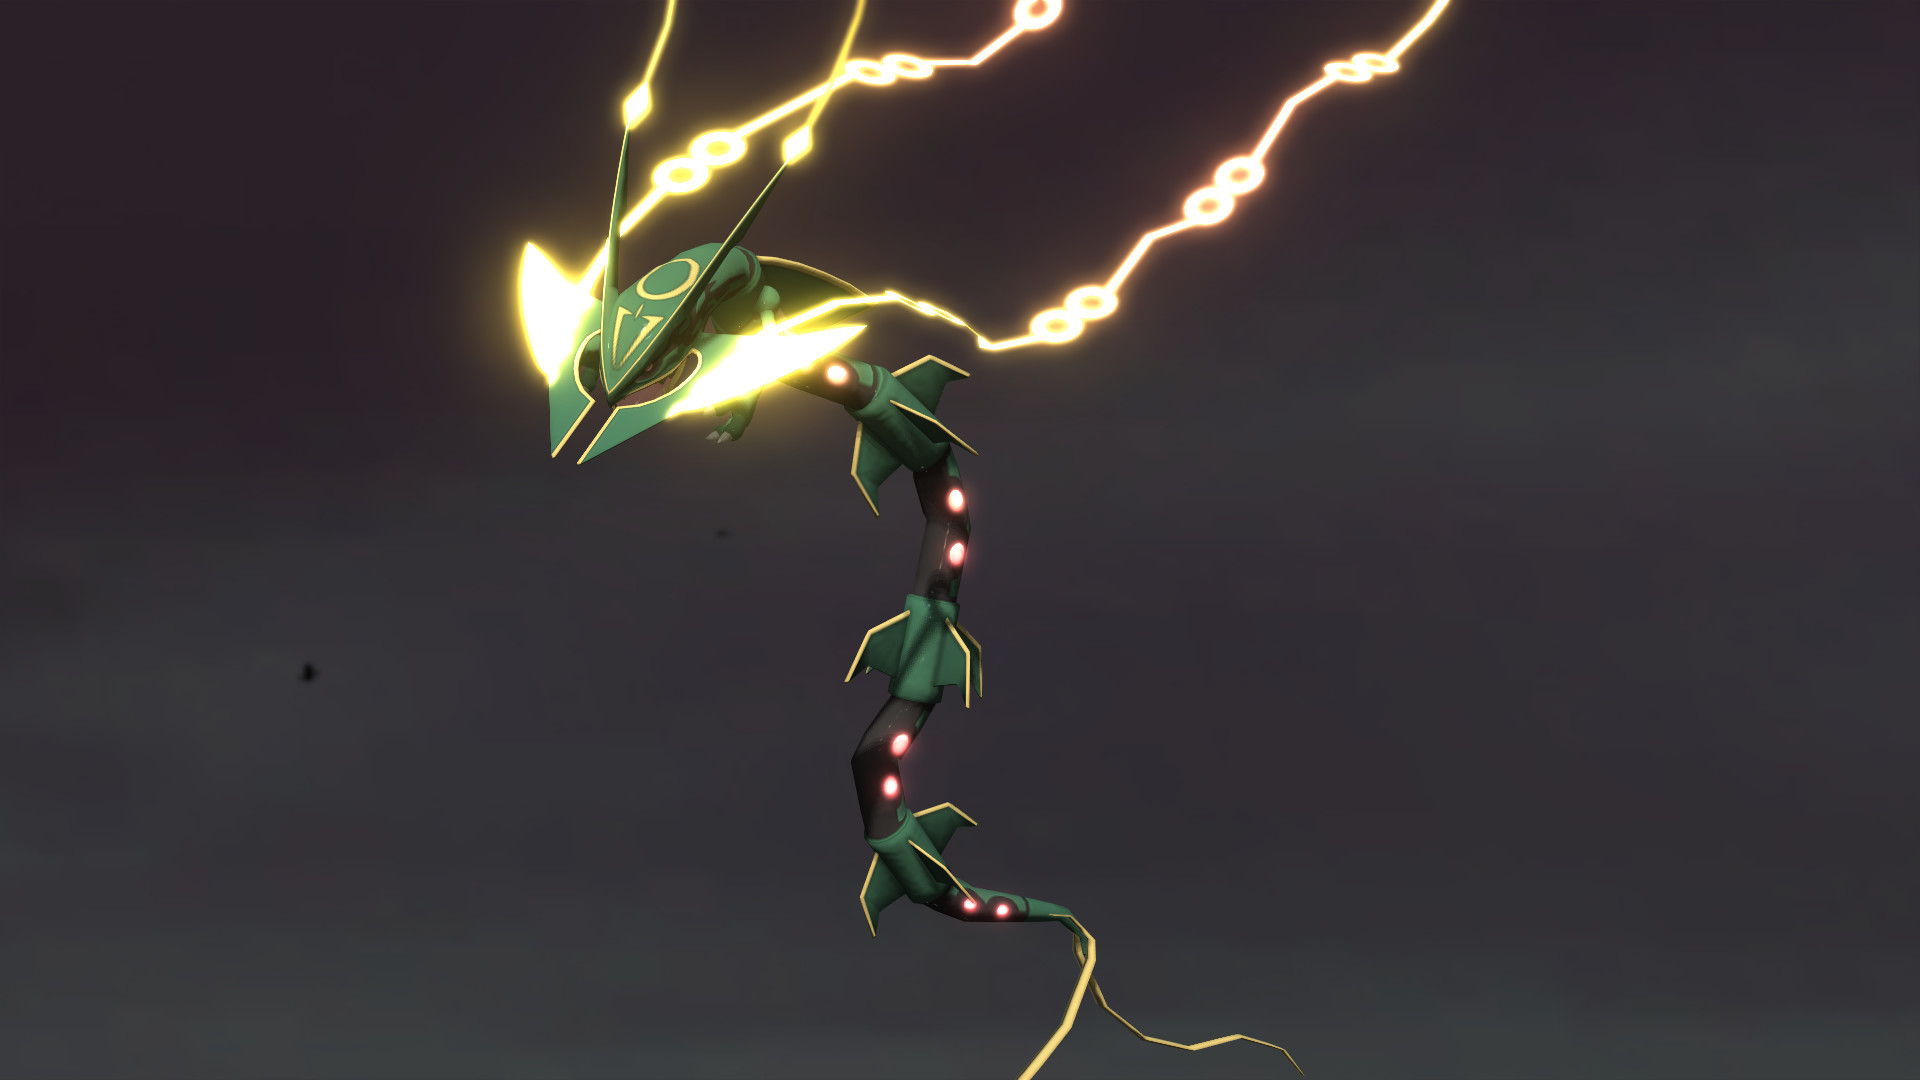 Pictures Of Mega Rayquaza Card Wallpapers